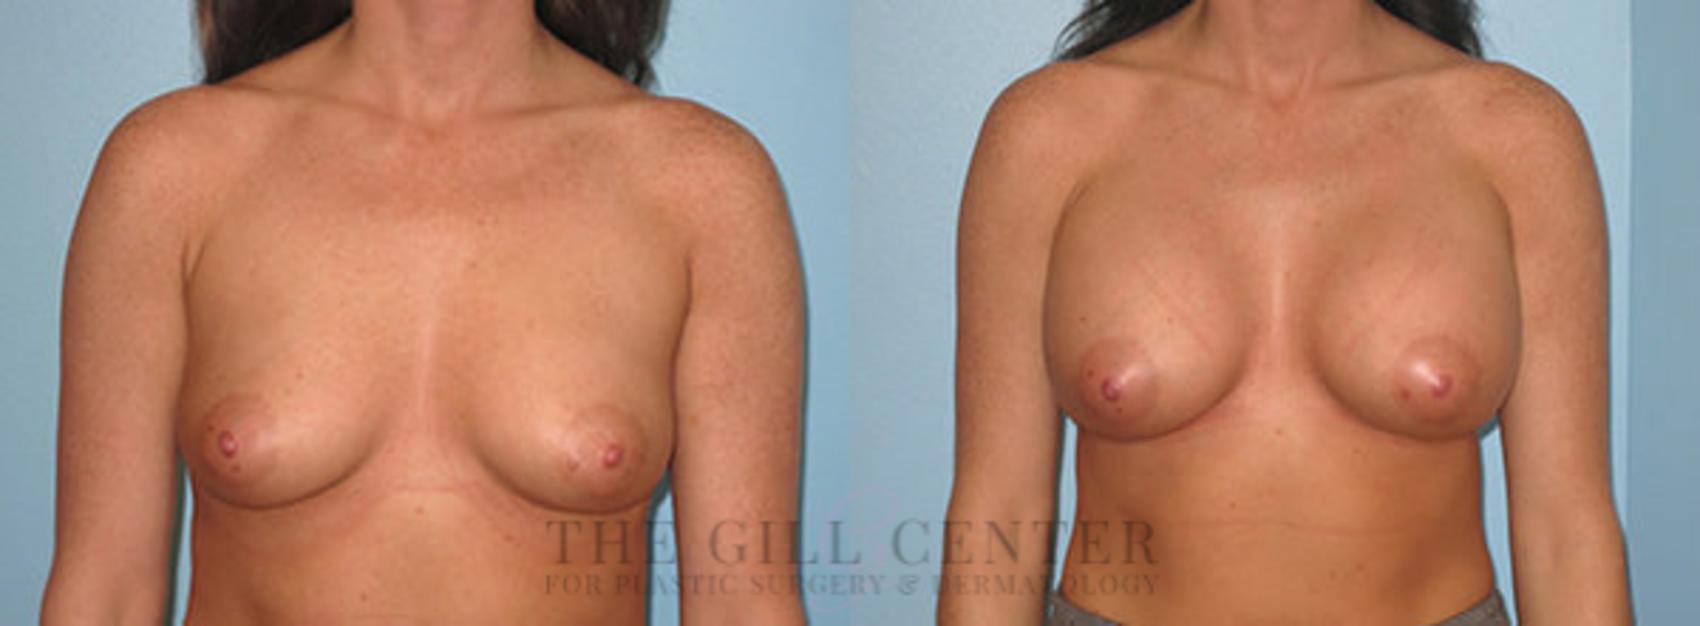 Breast Augmentation Case 54 Before & After Front | The Woodlands, TX | The Gill Center for Plastic Surgery and Dermatology